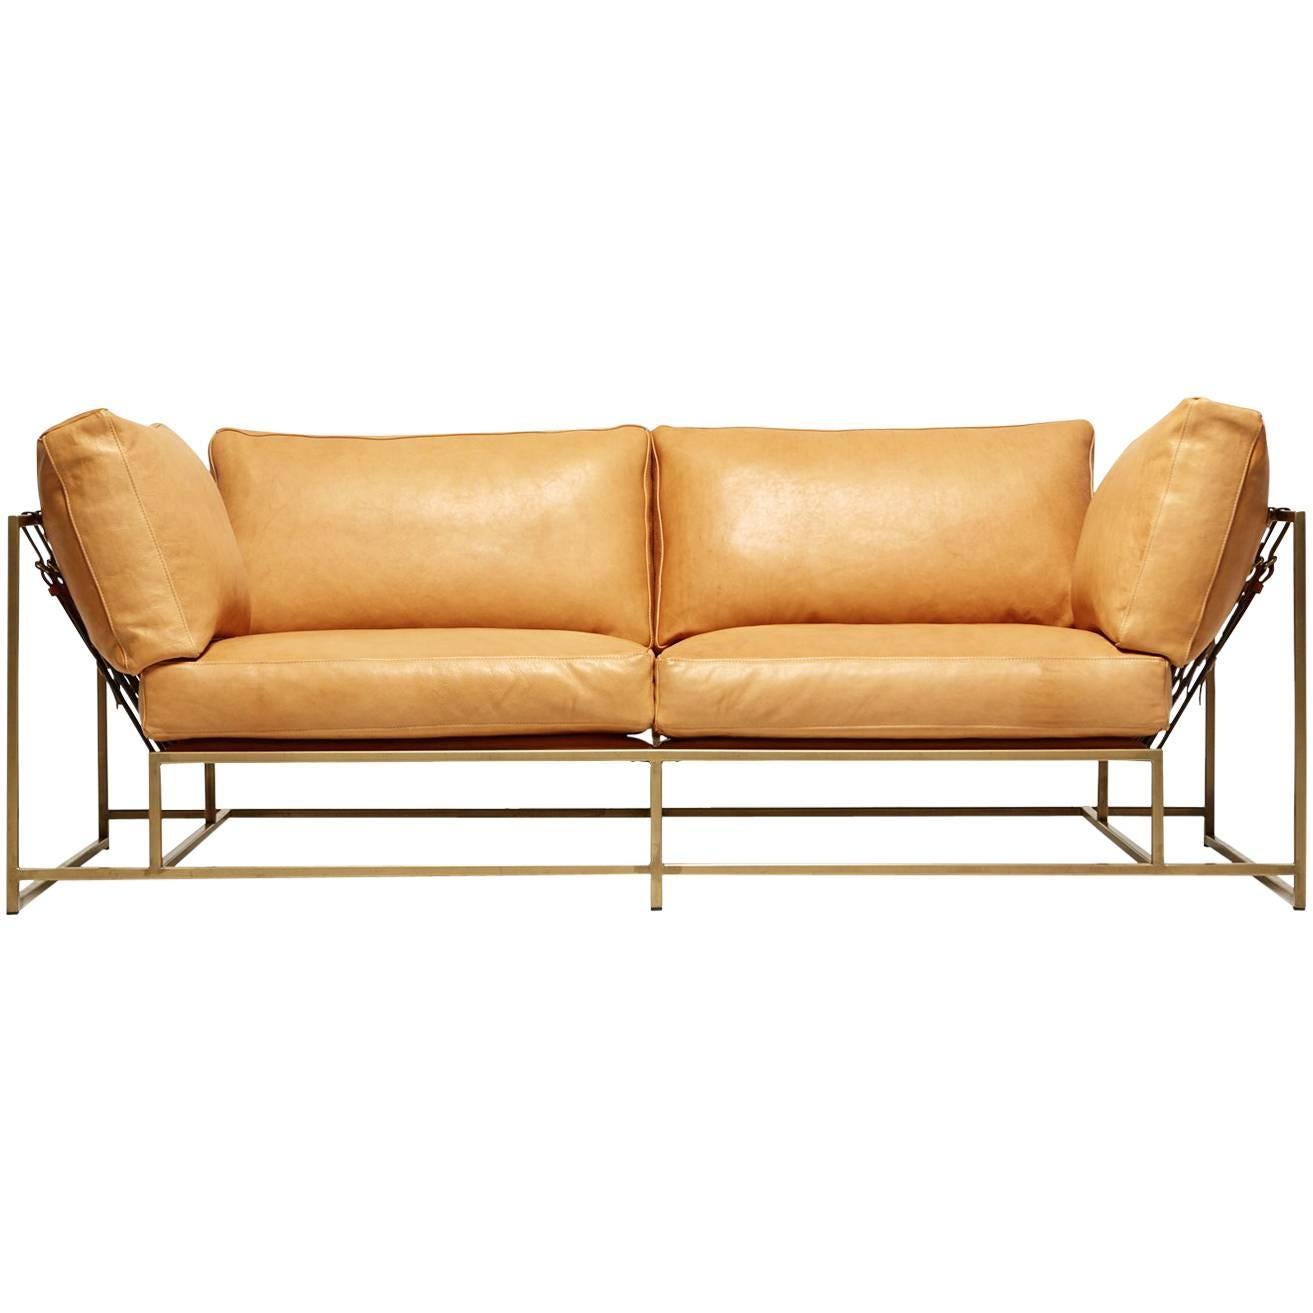 Natural Leather and Antique Brass Two Seat Sofa